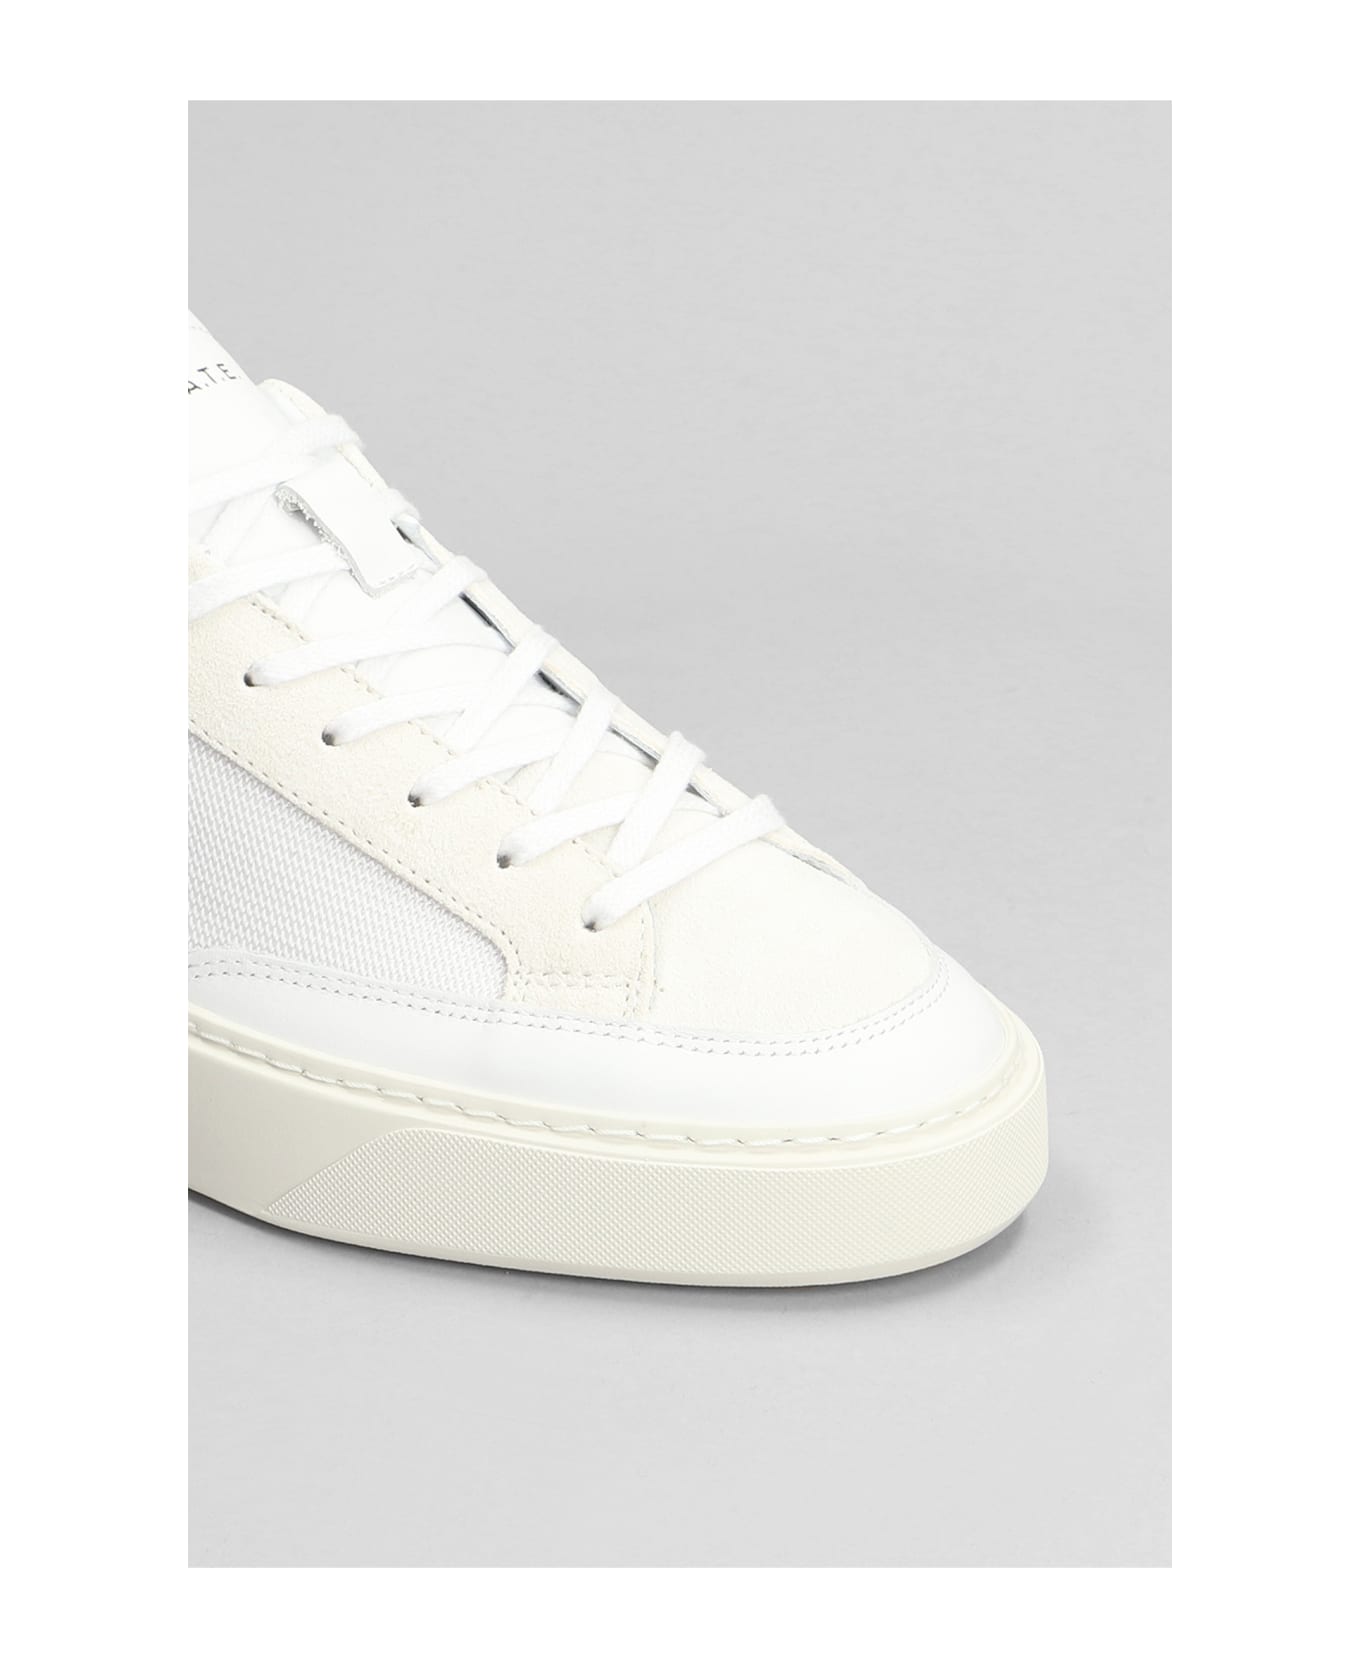 D.A.T.E. Levante Dragon Sneakers In White Suede And Fabric - white スニーカー